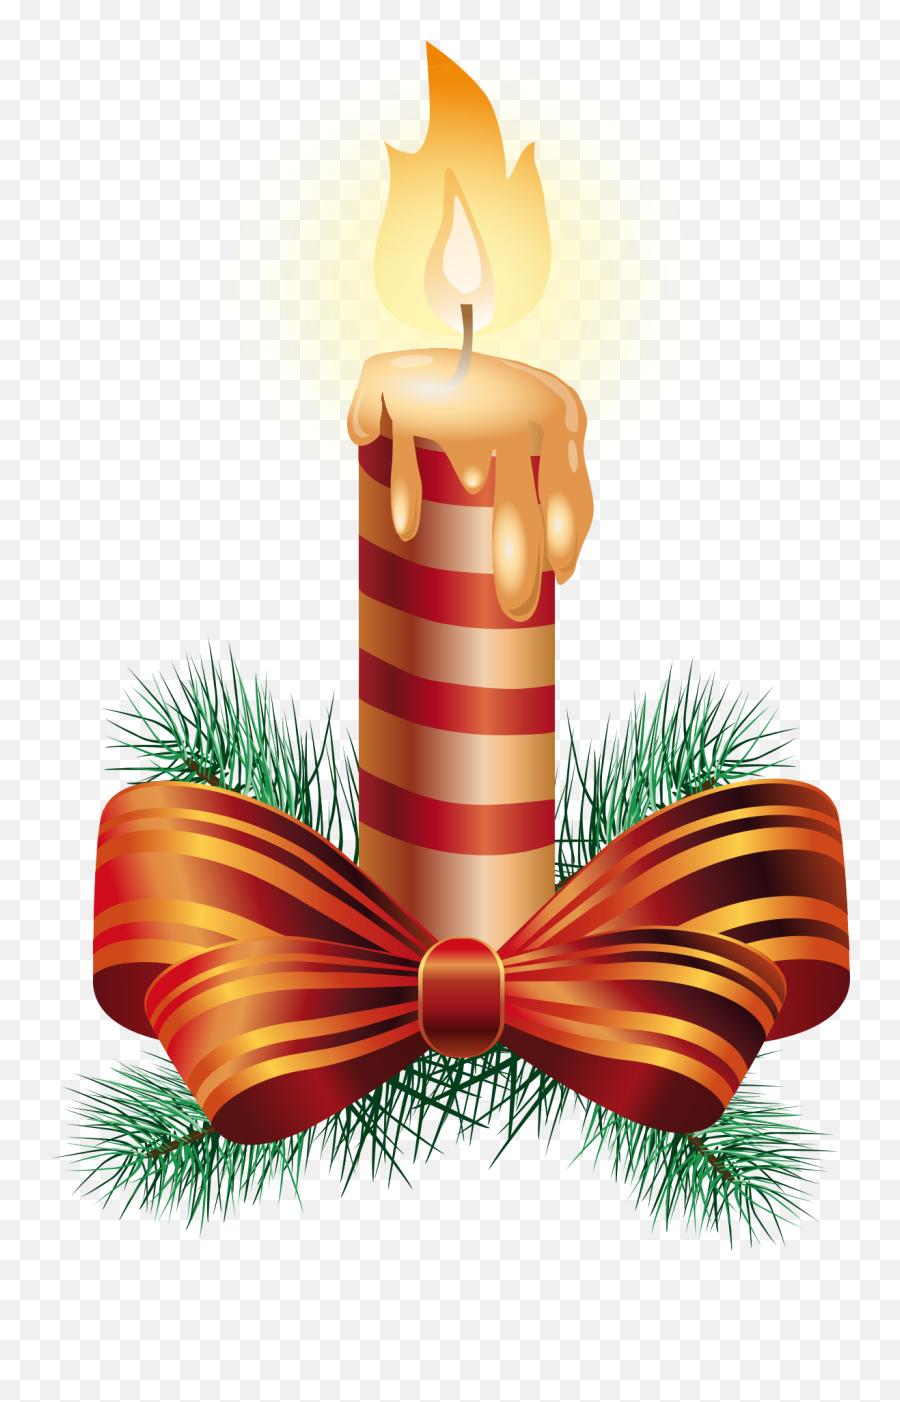 Download Candle Vector Ornament Christmas Candles Png Free Emoji,Christmas Ornament For Android Emoticon